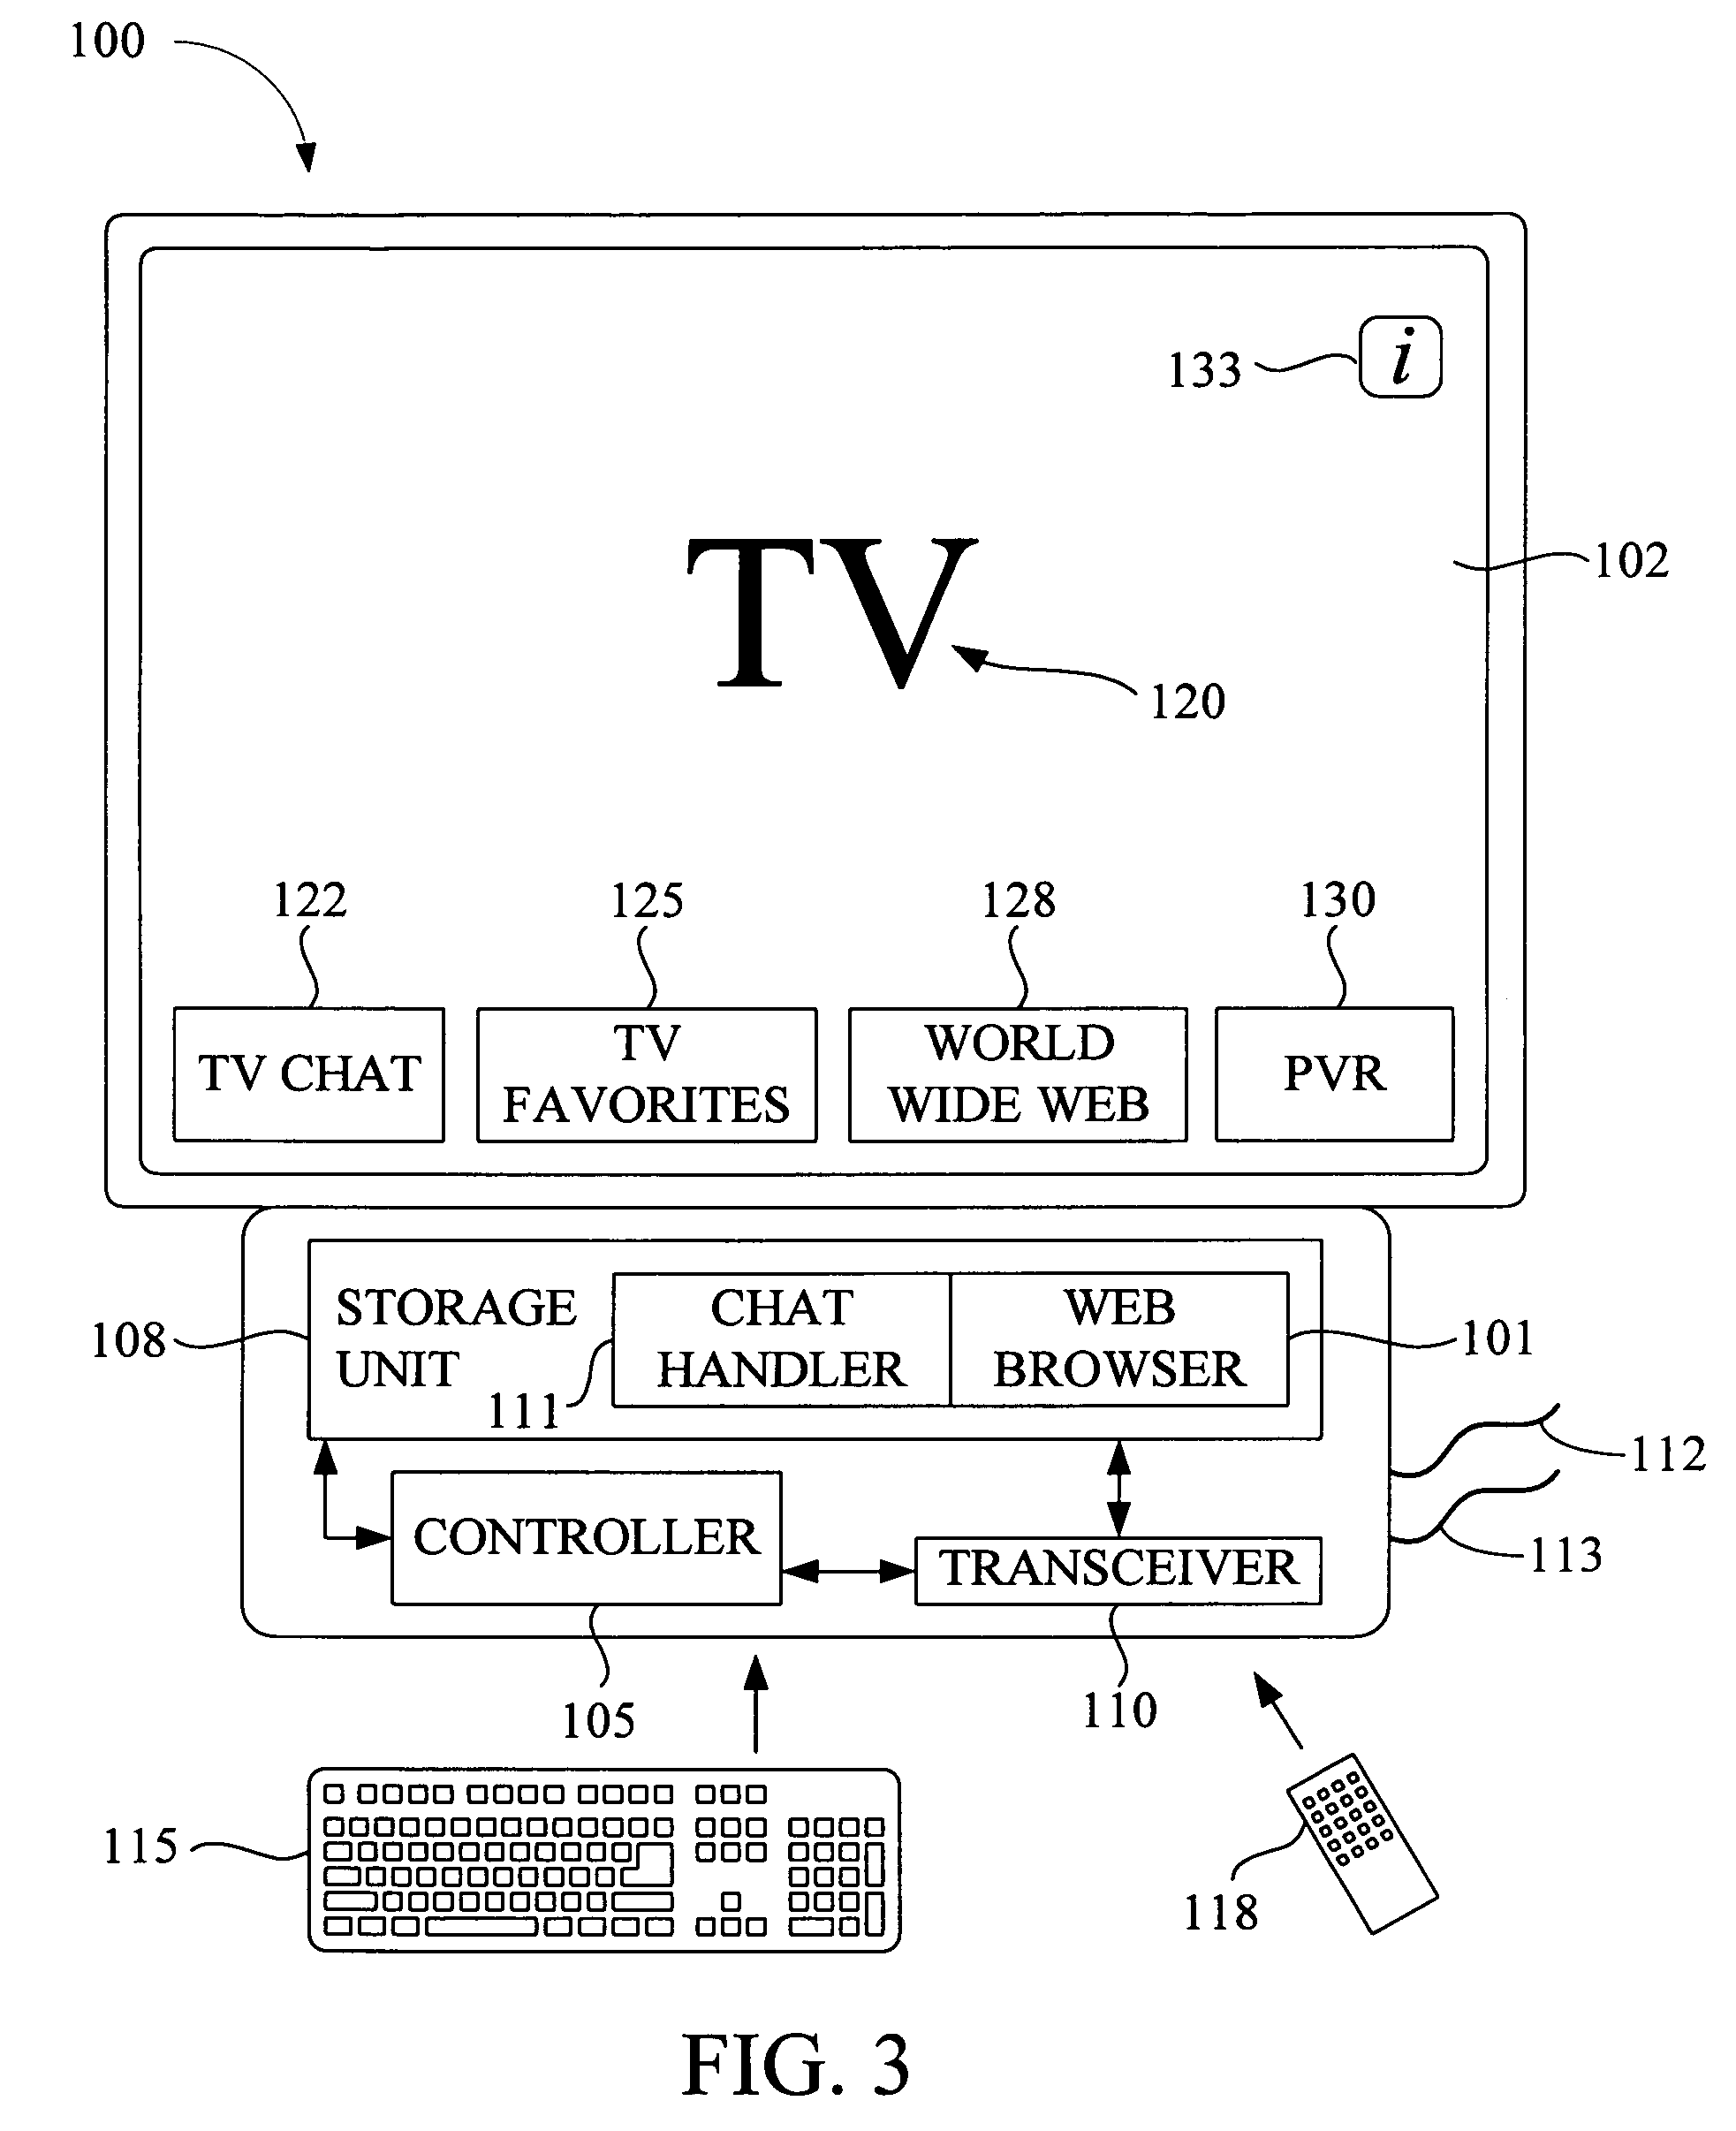 Multimode interactive television chat